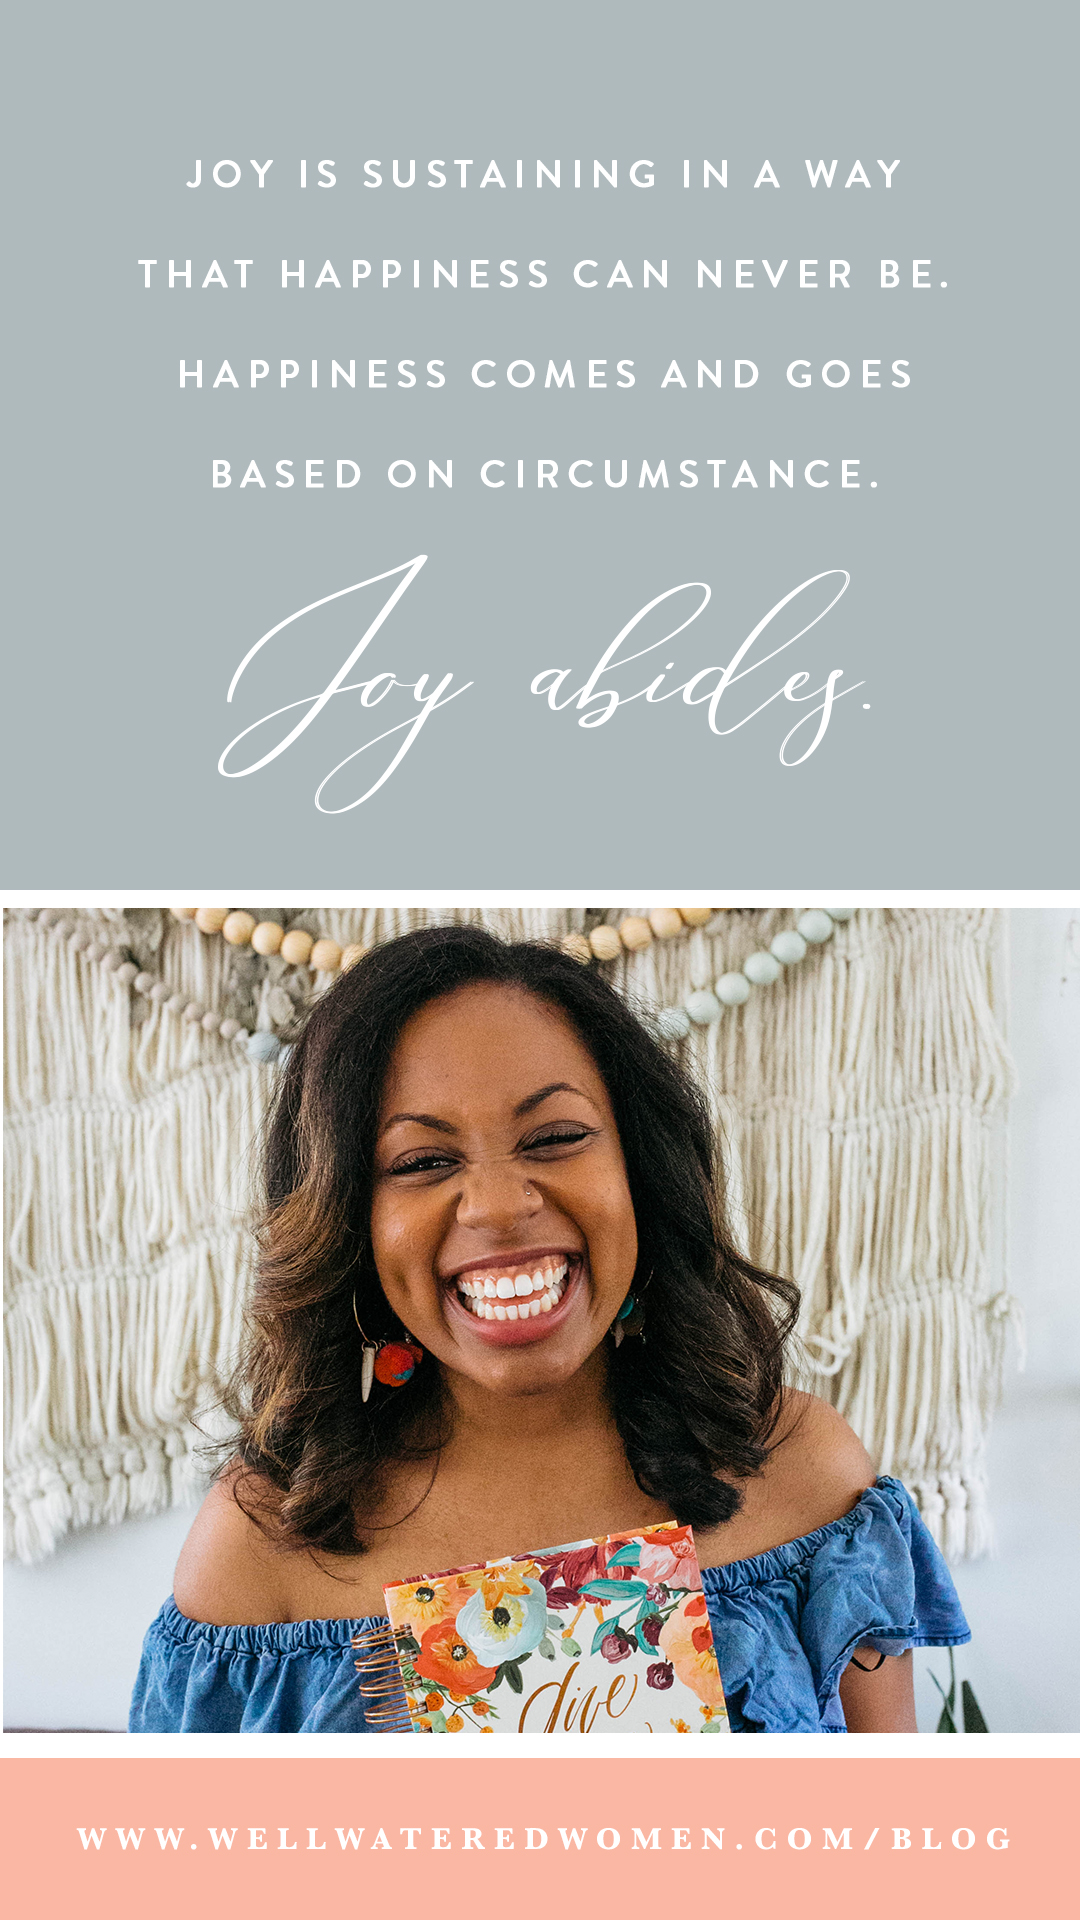 Being joyful can seem a lot like being happy, and when things are going well, our happiness is an aspect of our joyfulness. But joy is sustaining in a way that happiness can never be. Happiness comes and goes based on circumstance. Joy abides.